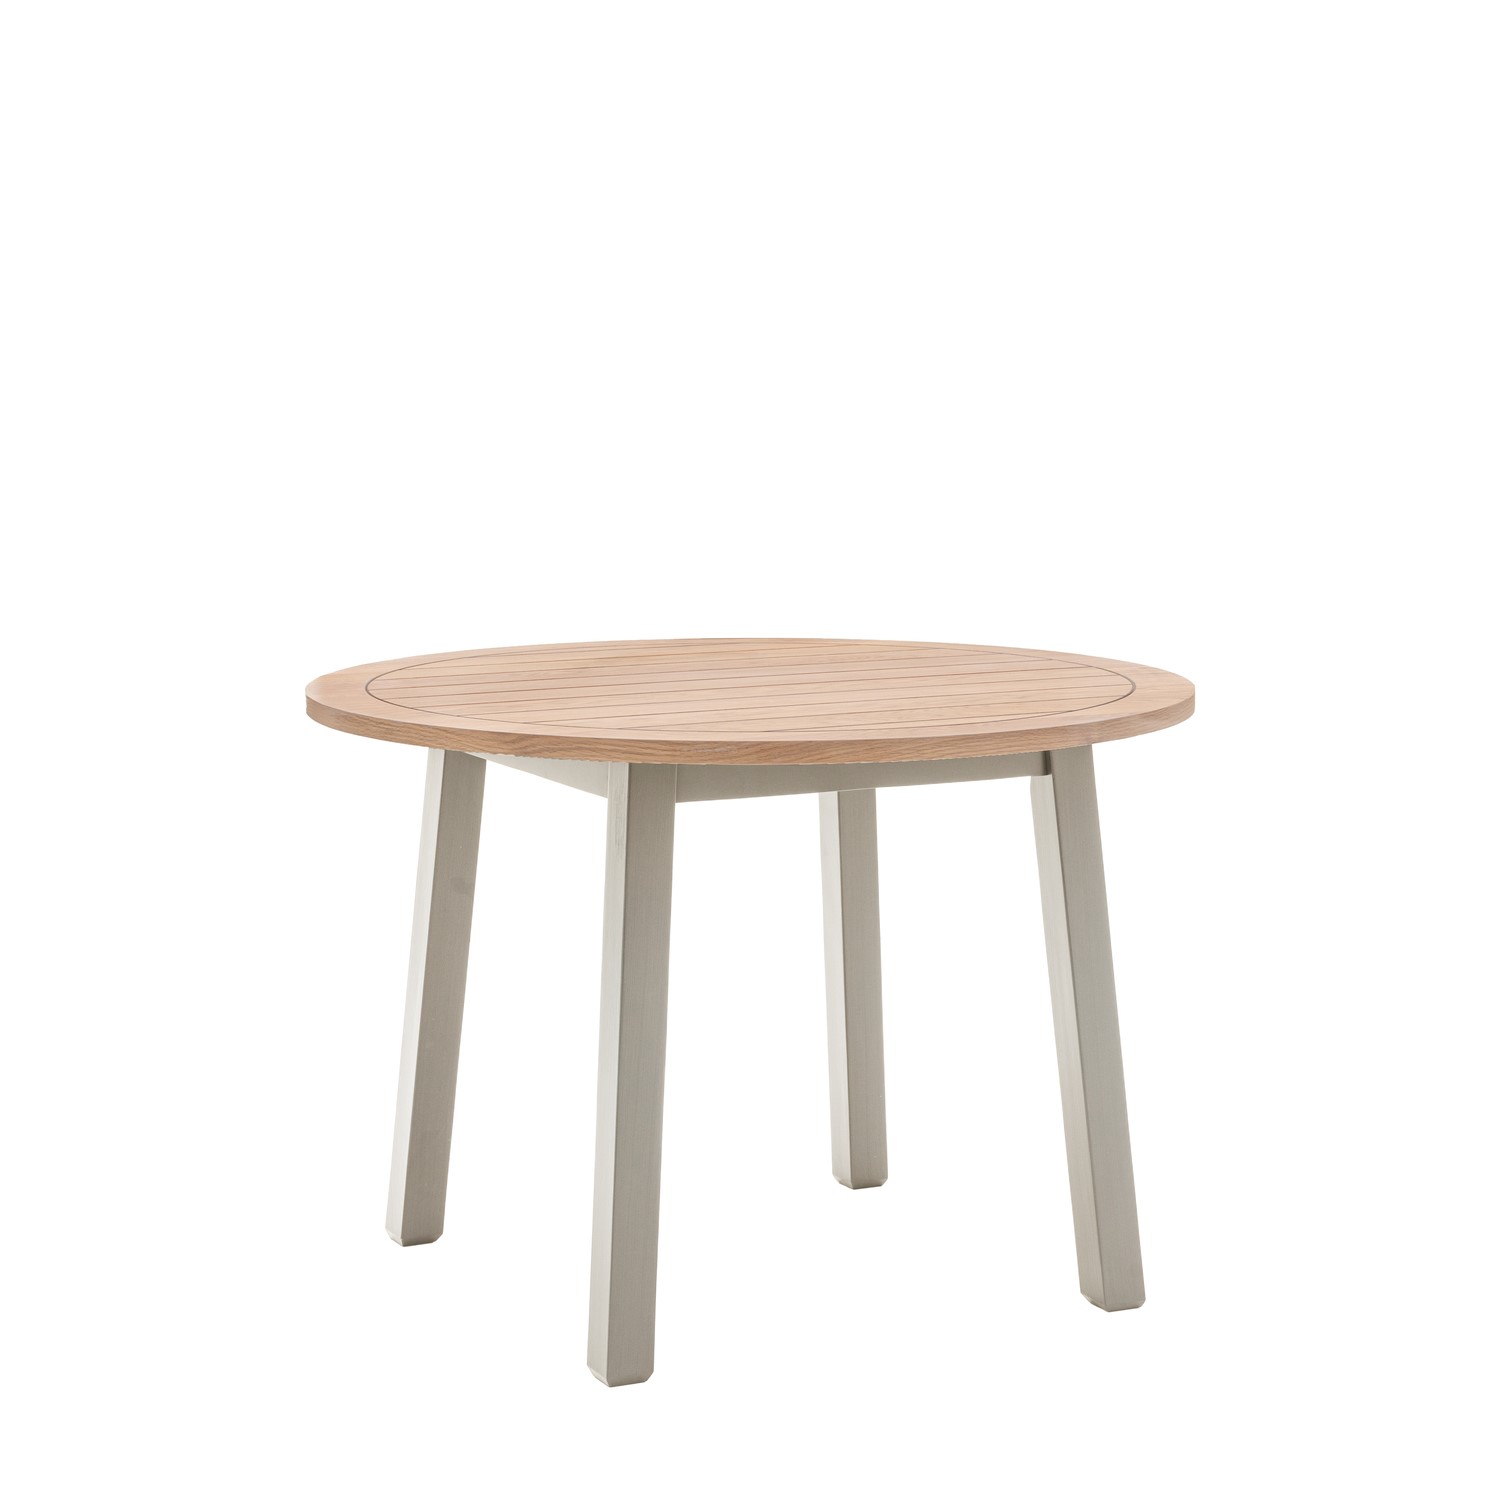 Read more about Eton round dining table sage green caspian house